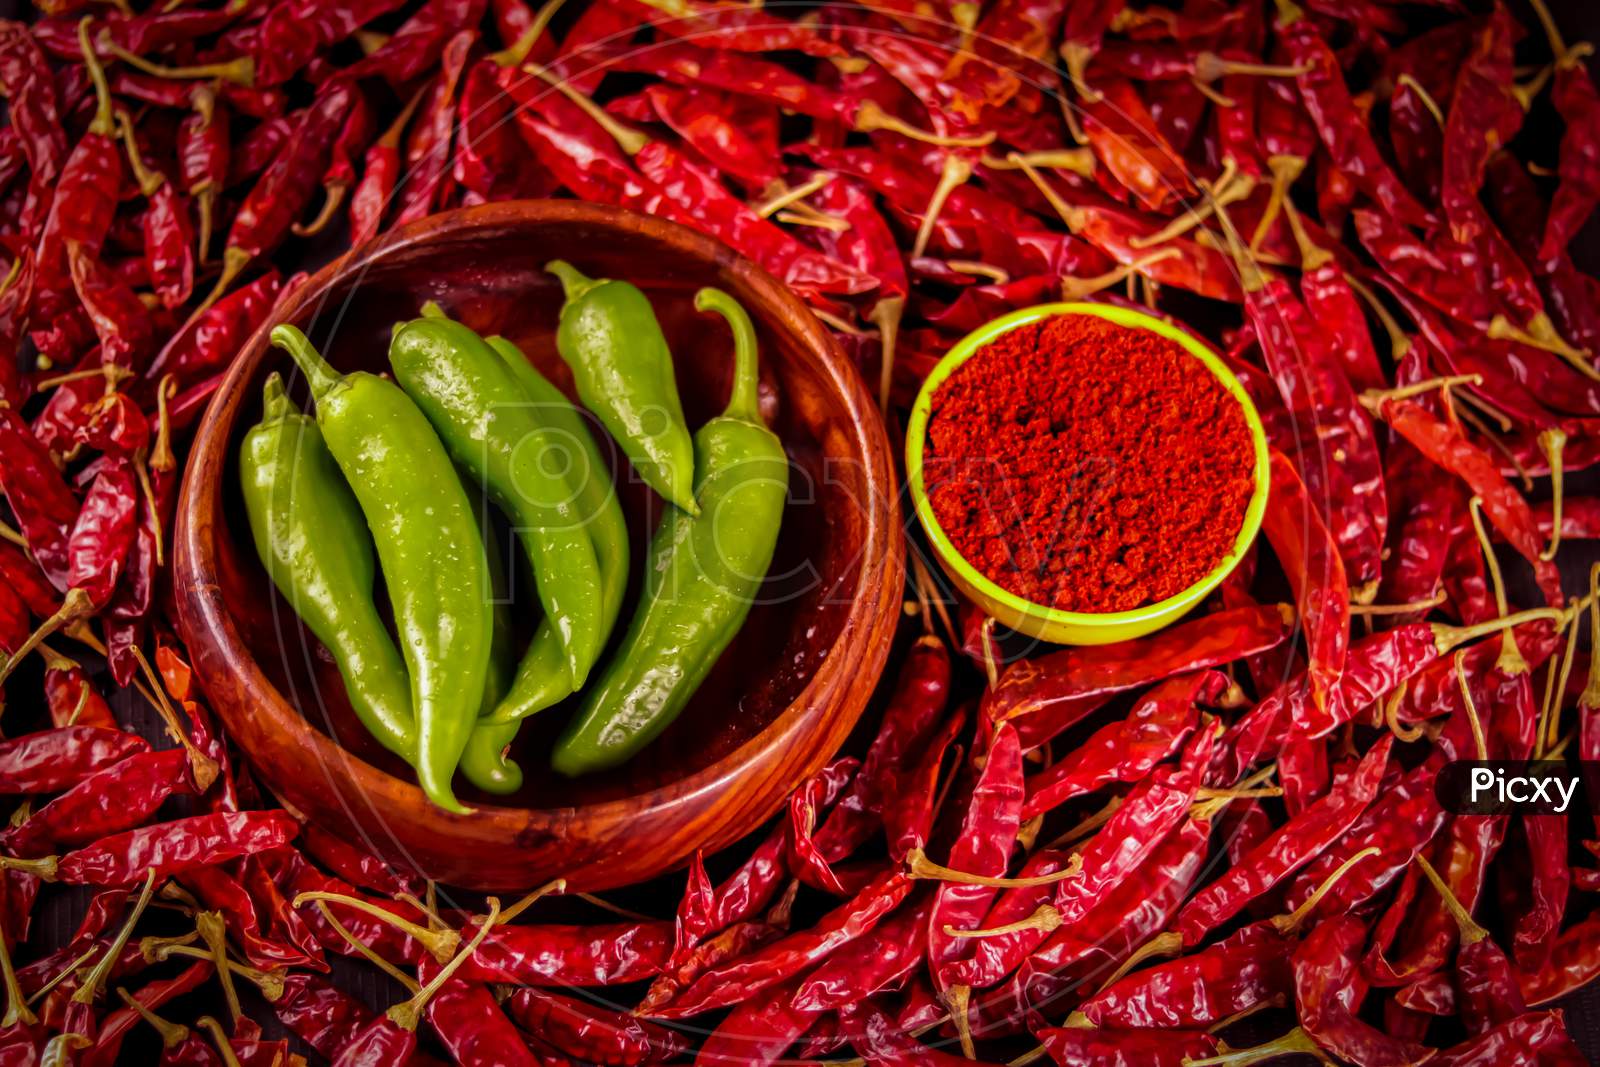 Dried Chili Pepper In Wooden Bowl On The Wooden Table With Chili Pepper Powder In Yellow Bowl,Used As Hot Spice,